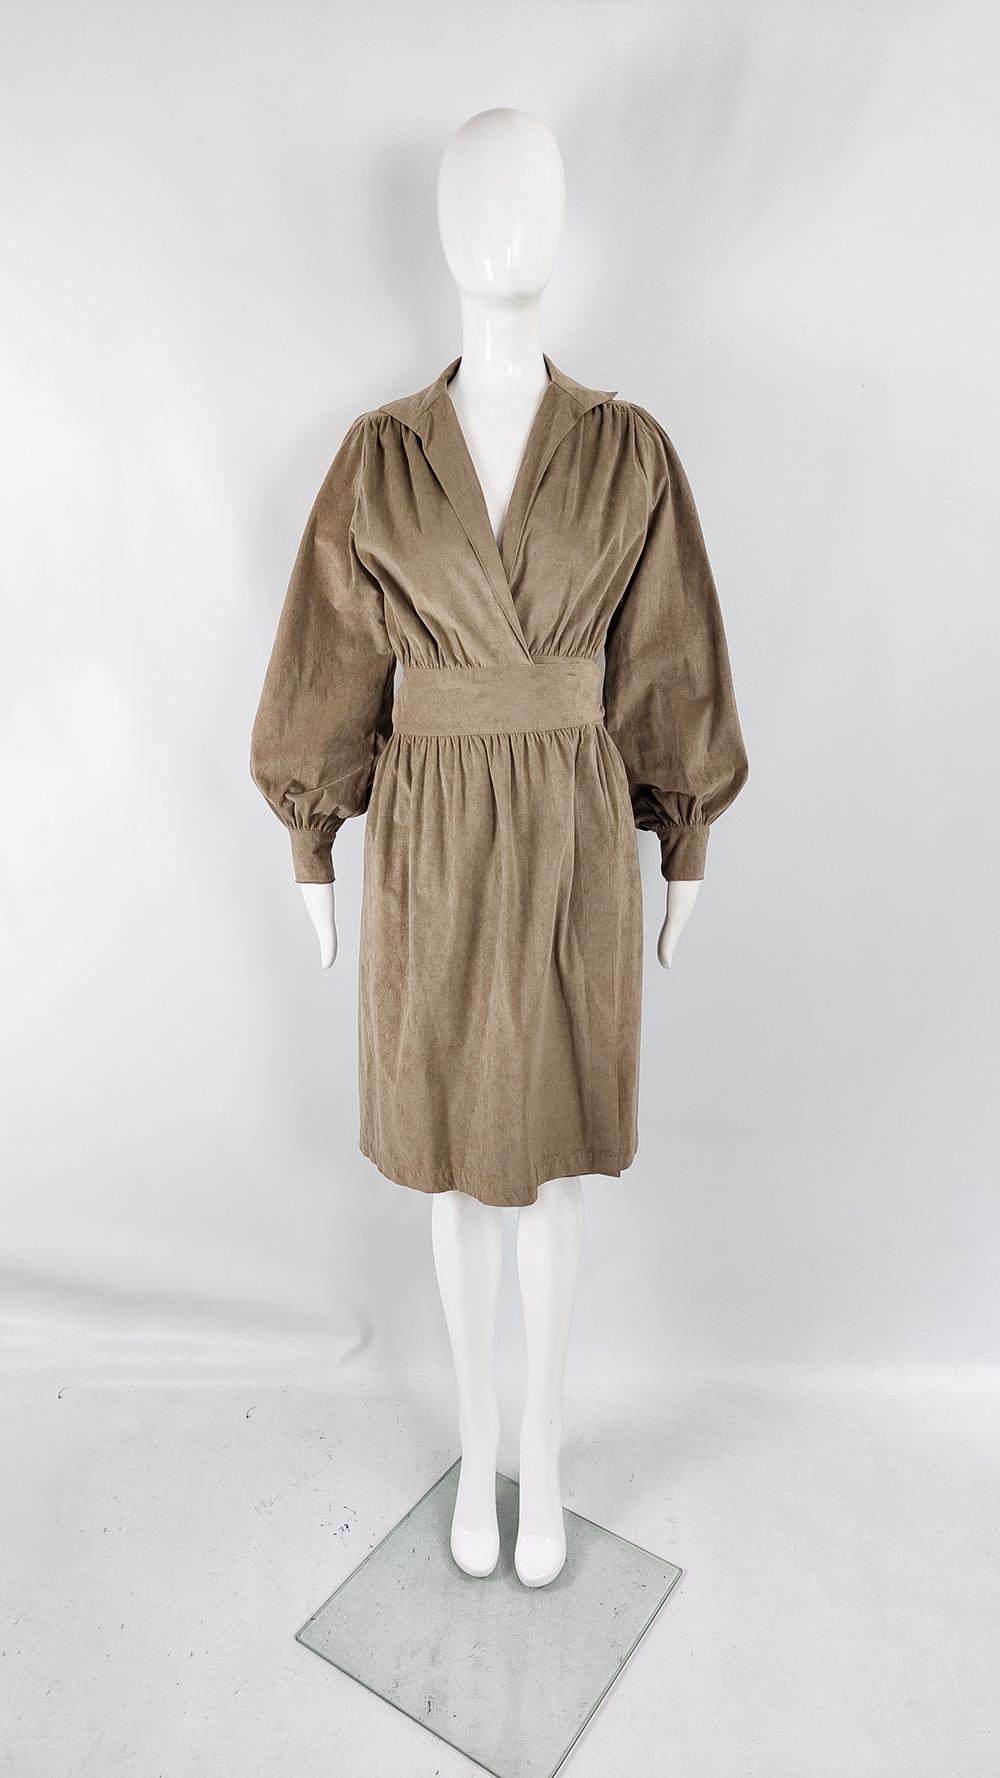 A stunning vintage womens dress from the 70s by luxury American fashion designer, Adele Simpson. In a mushroom / taupe coloured ultrasuede fabric with a wrap style front that gives a nipped waist and a flattering loose, blouson fit on top with